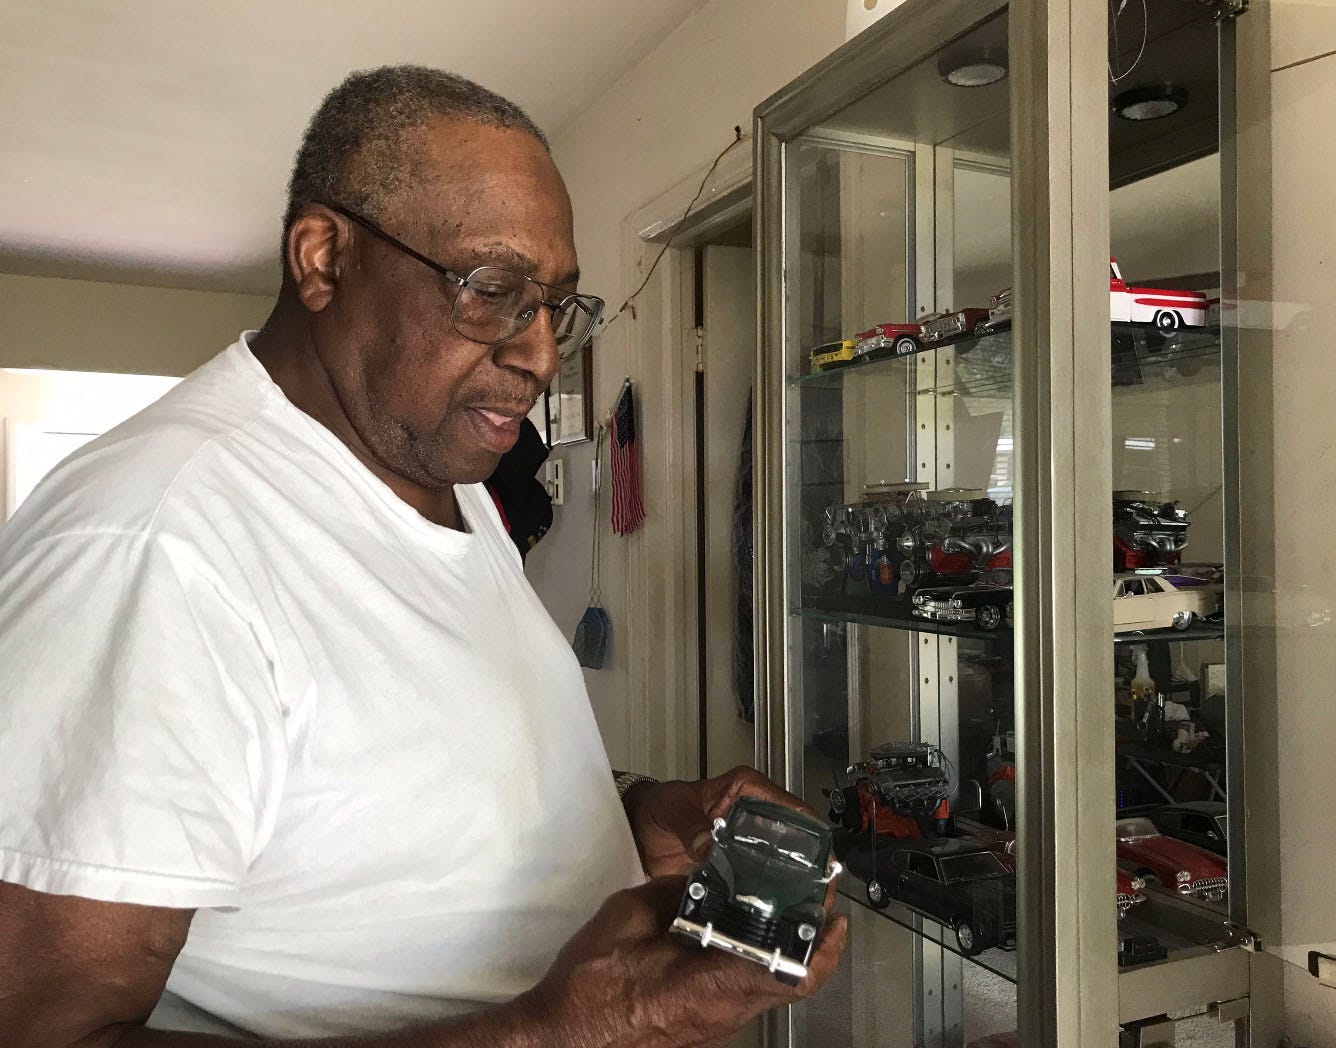 Percy Dickerson, 80, is a Vietnam veteran who has lived in the apartments since 1999. He said the previous owner never made repairs. Since the new owner took over, however, his bathroom has been revamped and several kitchen appliances were installed.